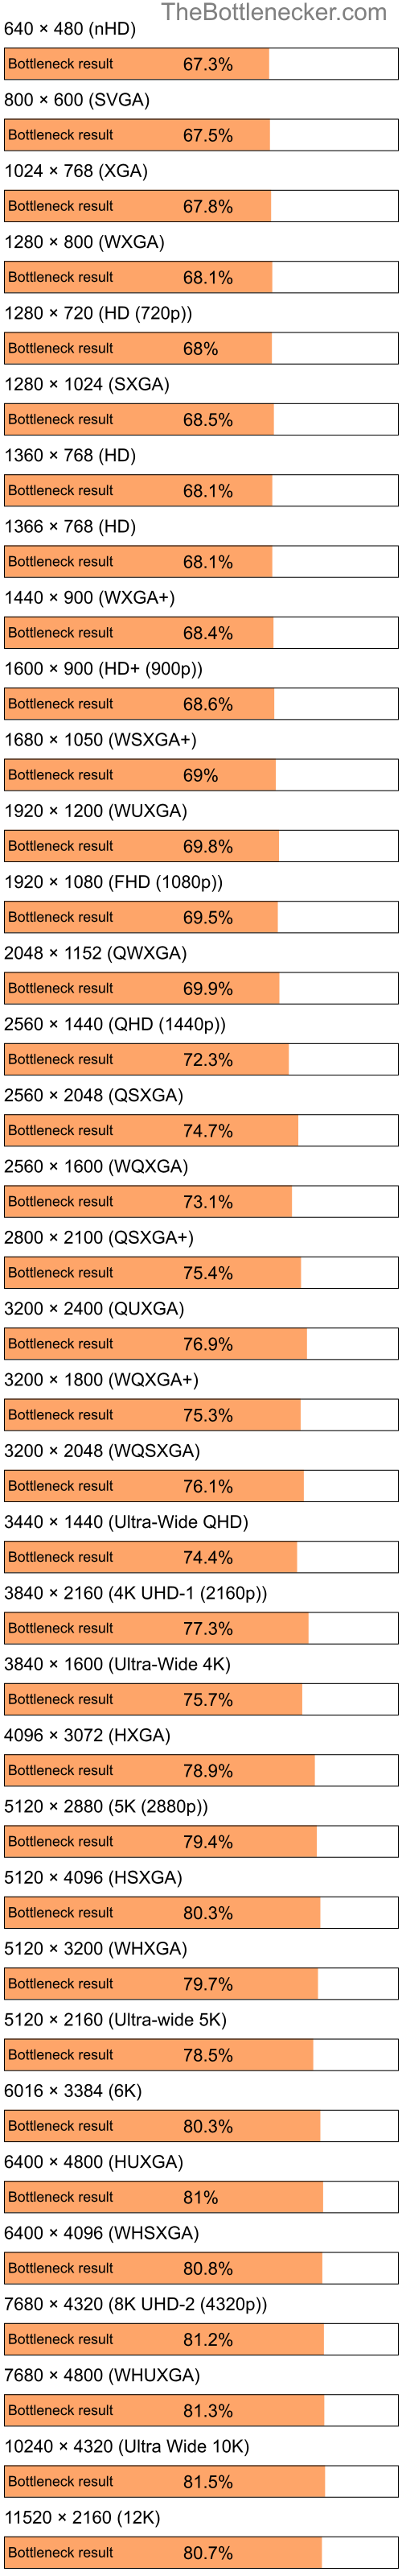 Bottleneck results by resolution for Intel Pentium 4 and NVIDIA GeForce 8400M G in General Tasks